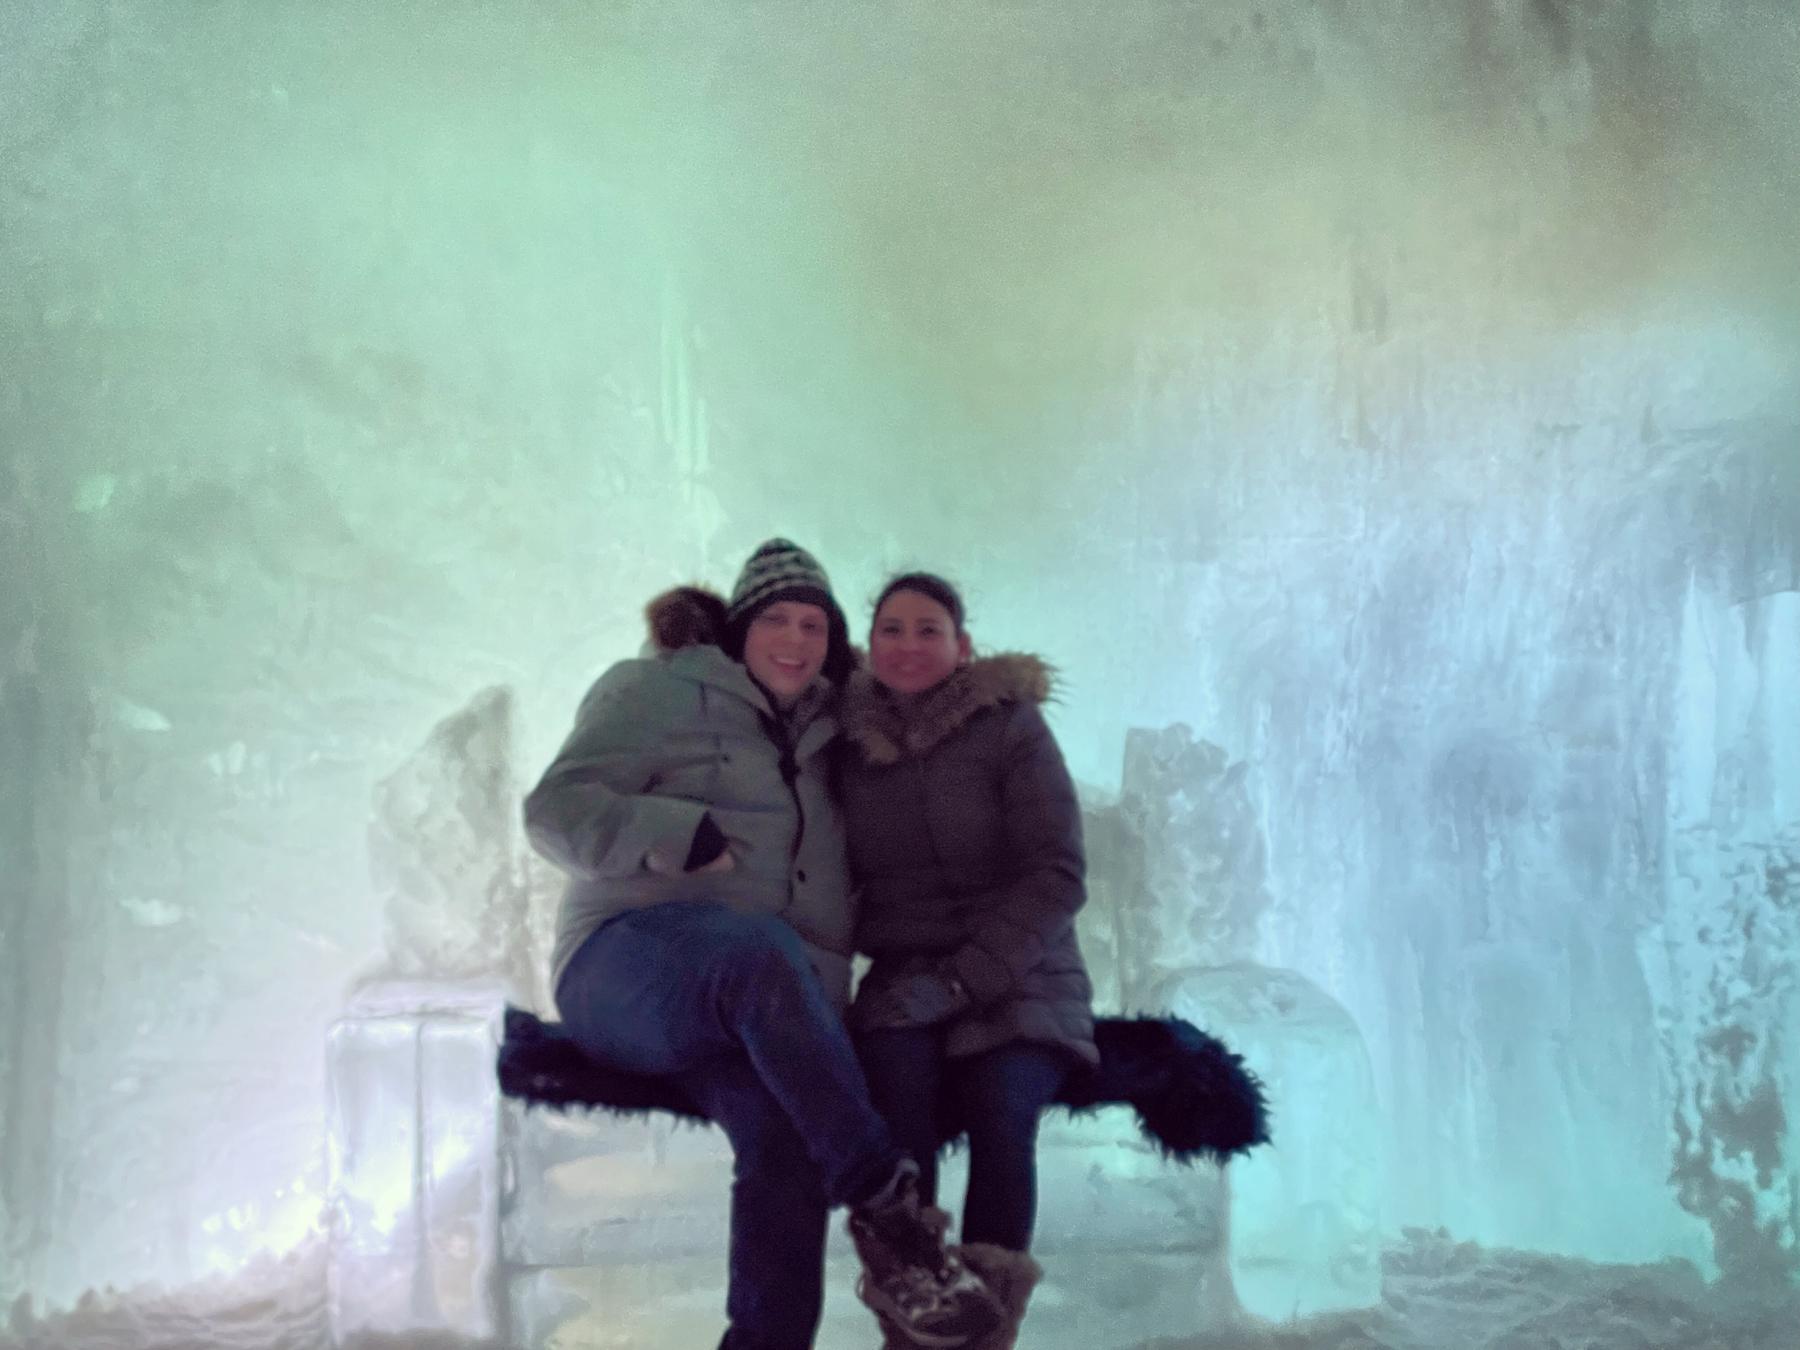 Freezing together at Ice Castles